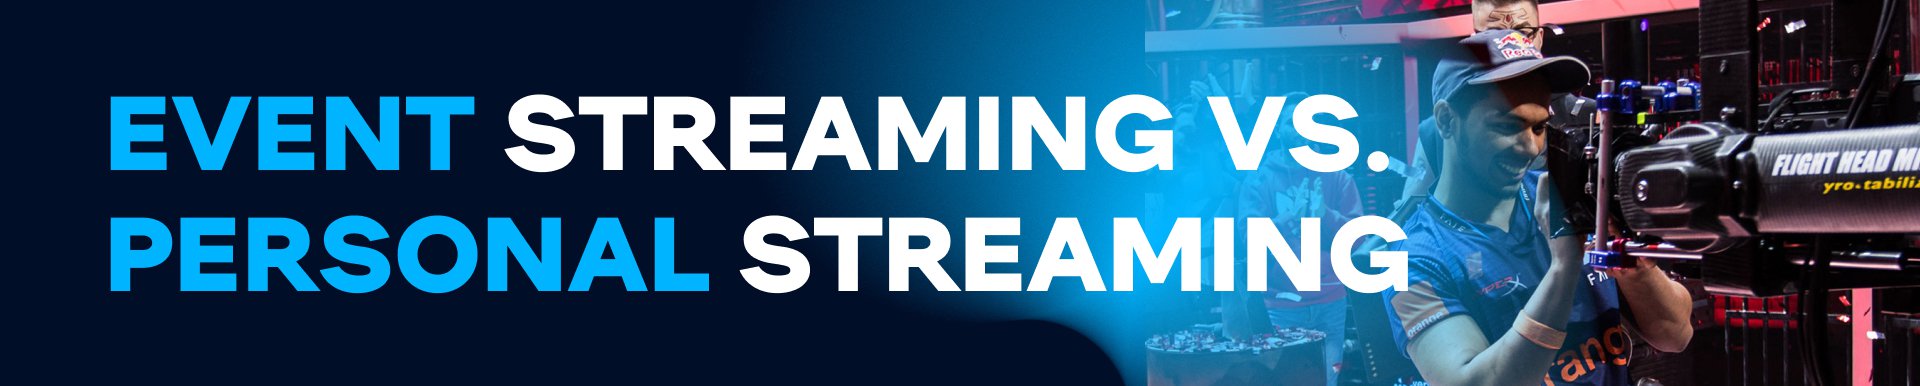 Event streaming vs. Personal streaming. Image: WePlay Holding